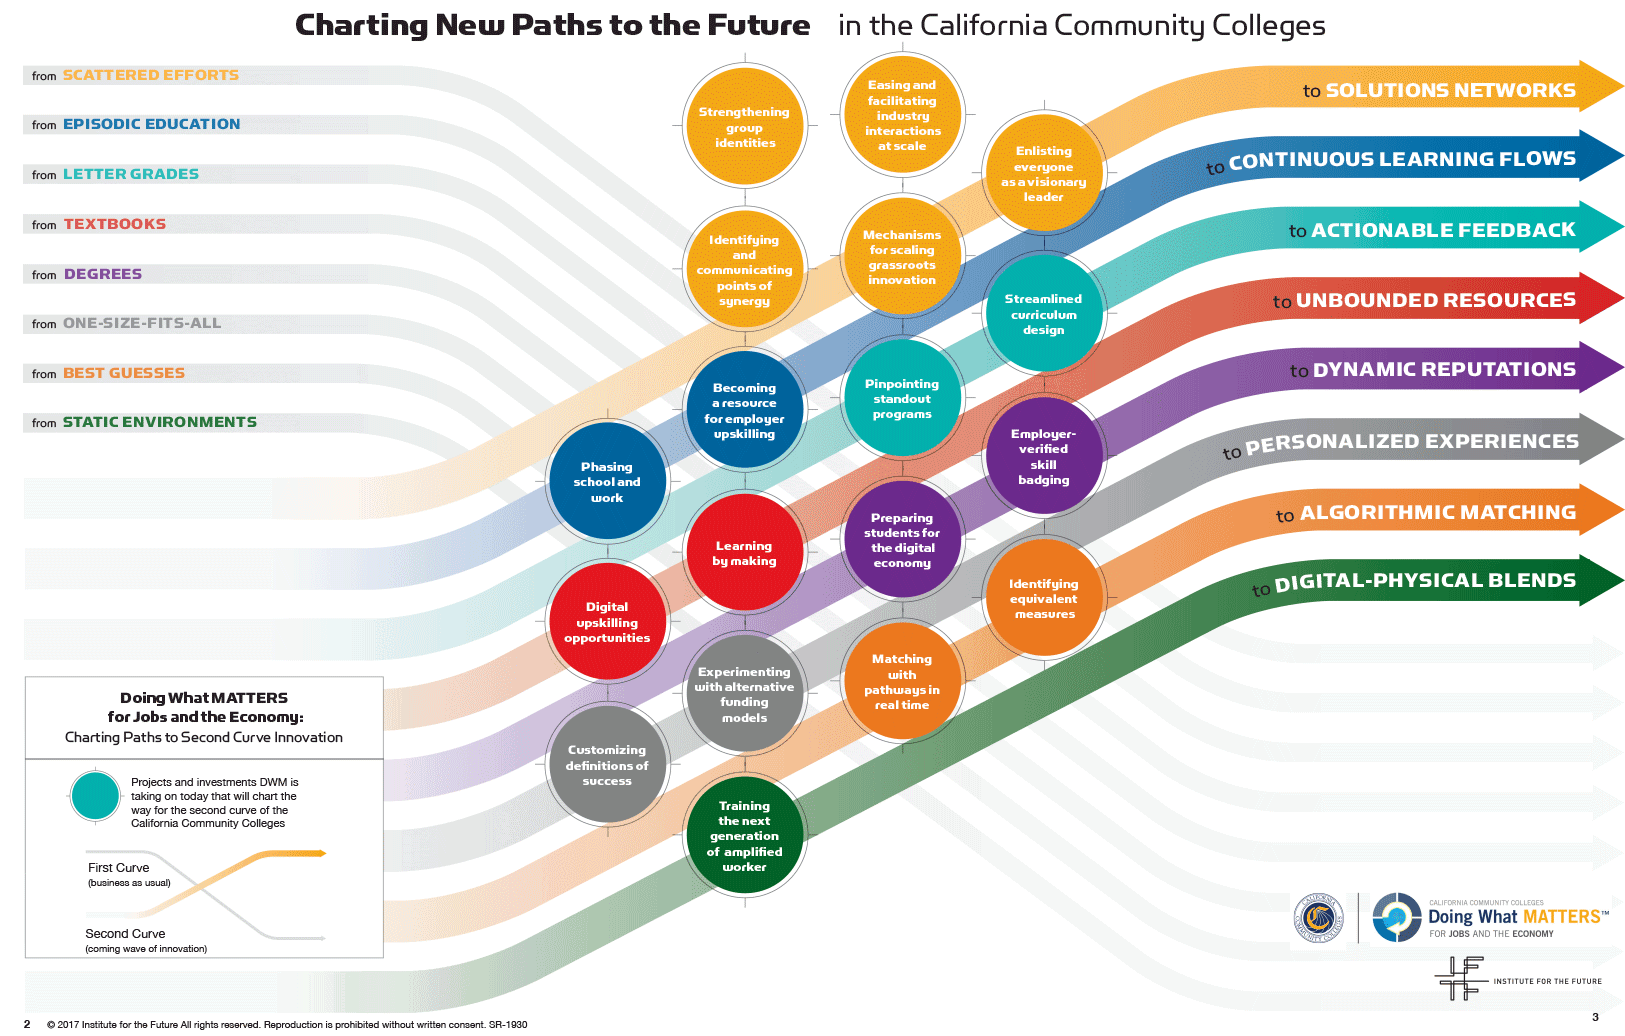 Charting New Paths to the Future Infographic